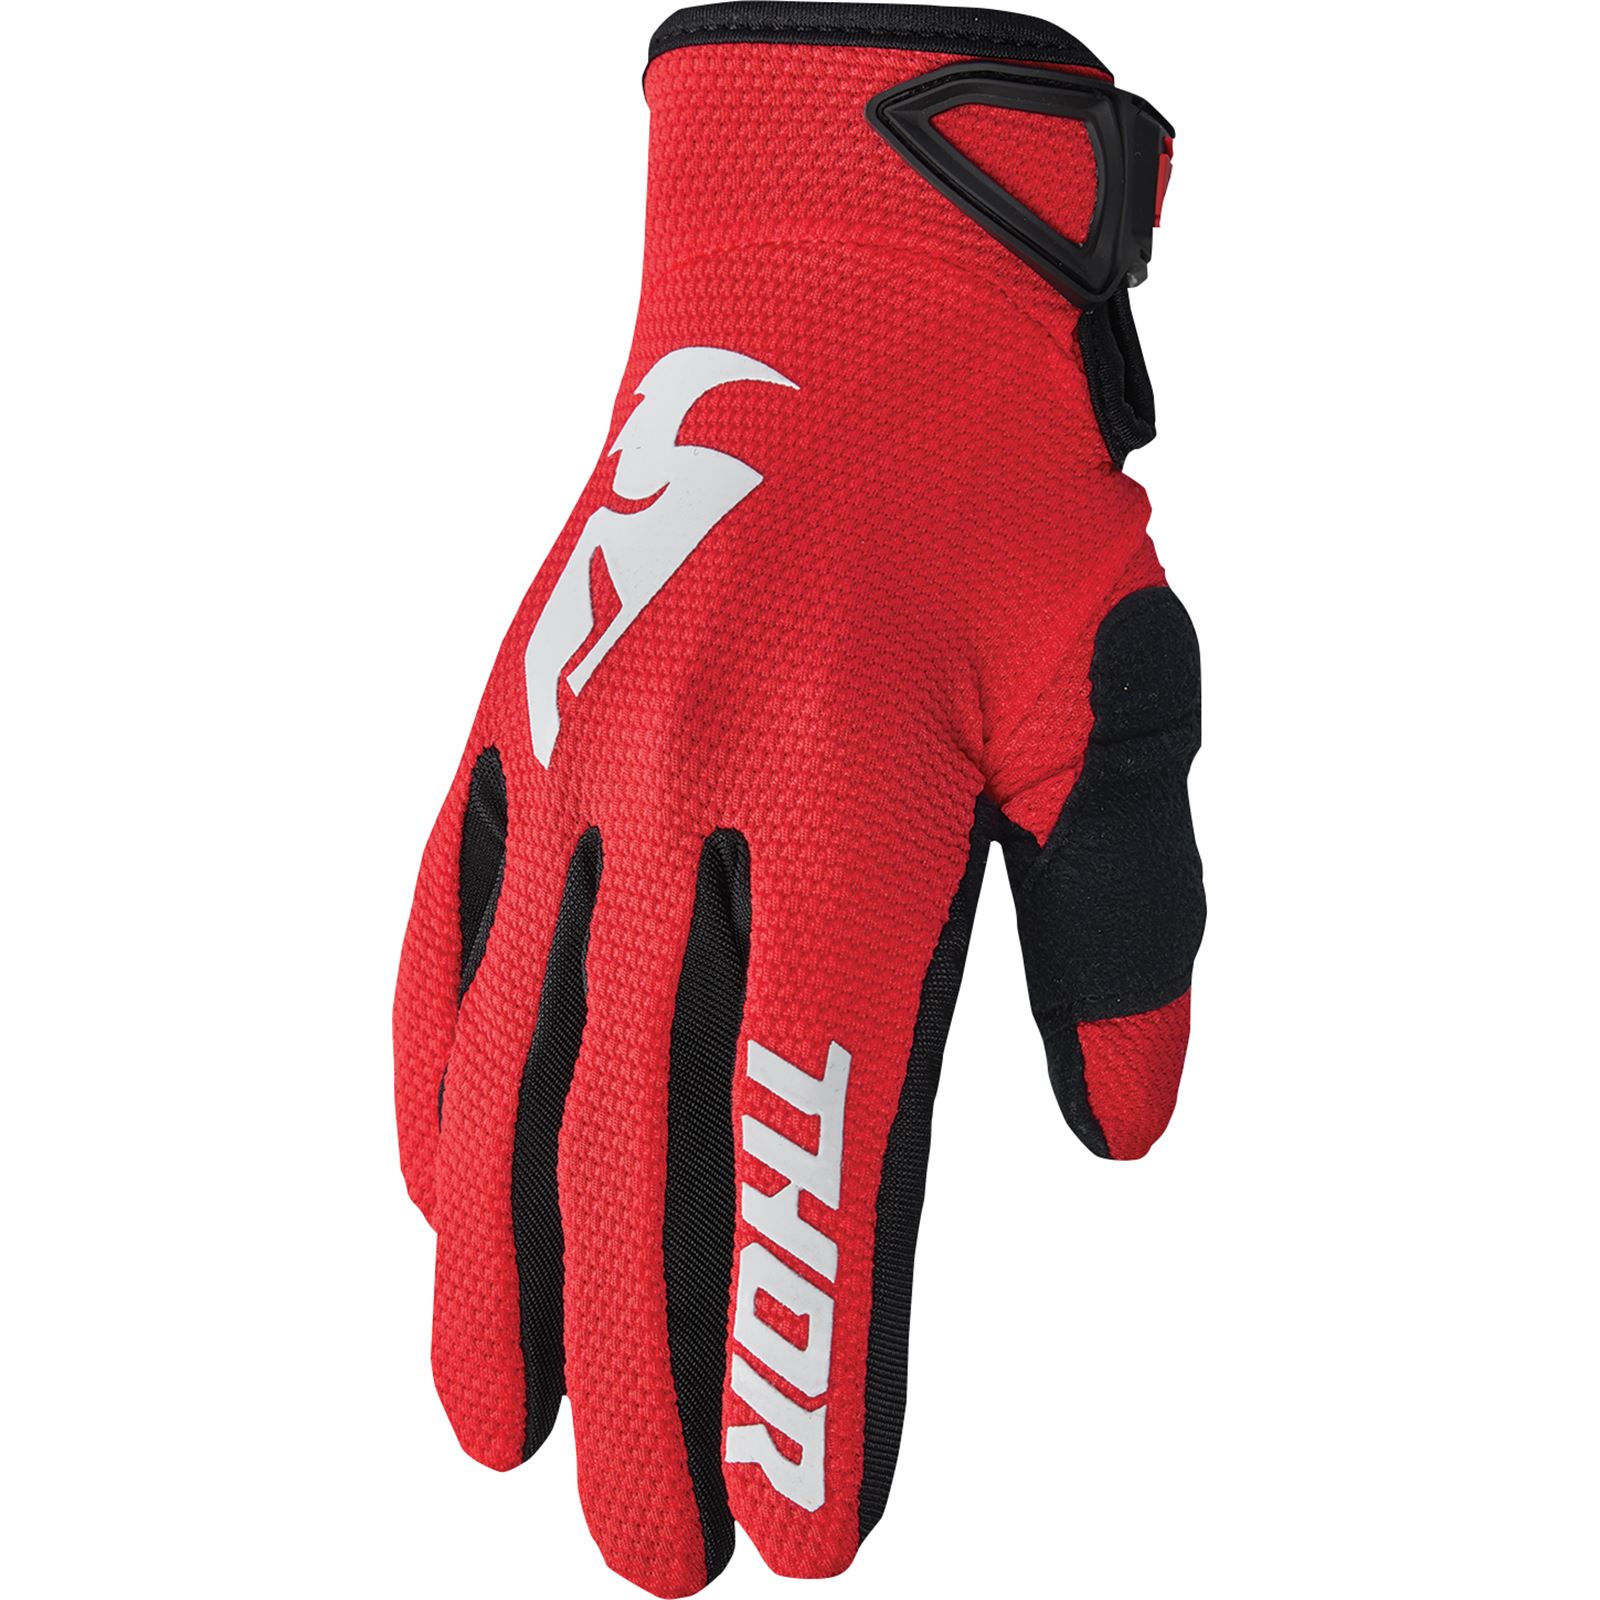 Thor Sector Gloves - Red/White - 2XL